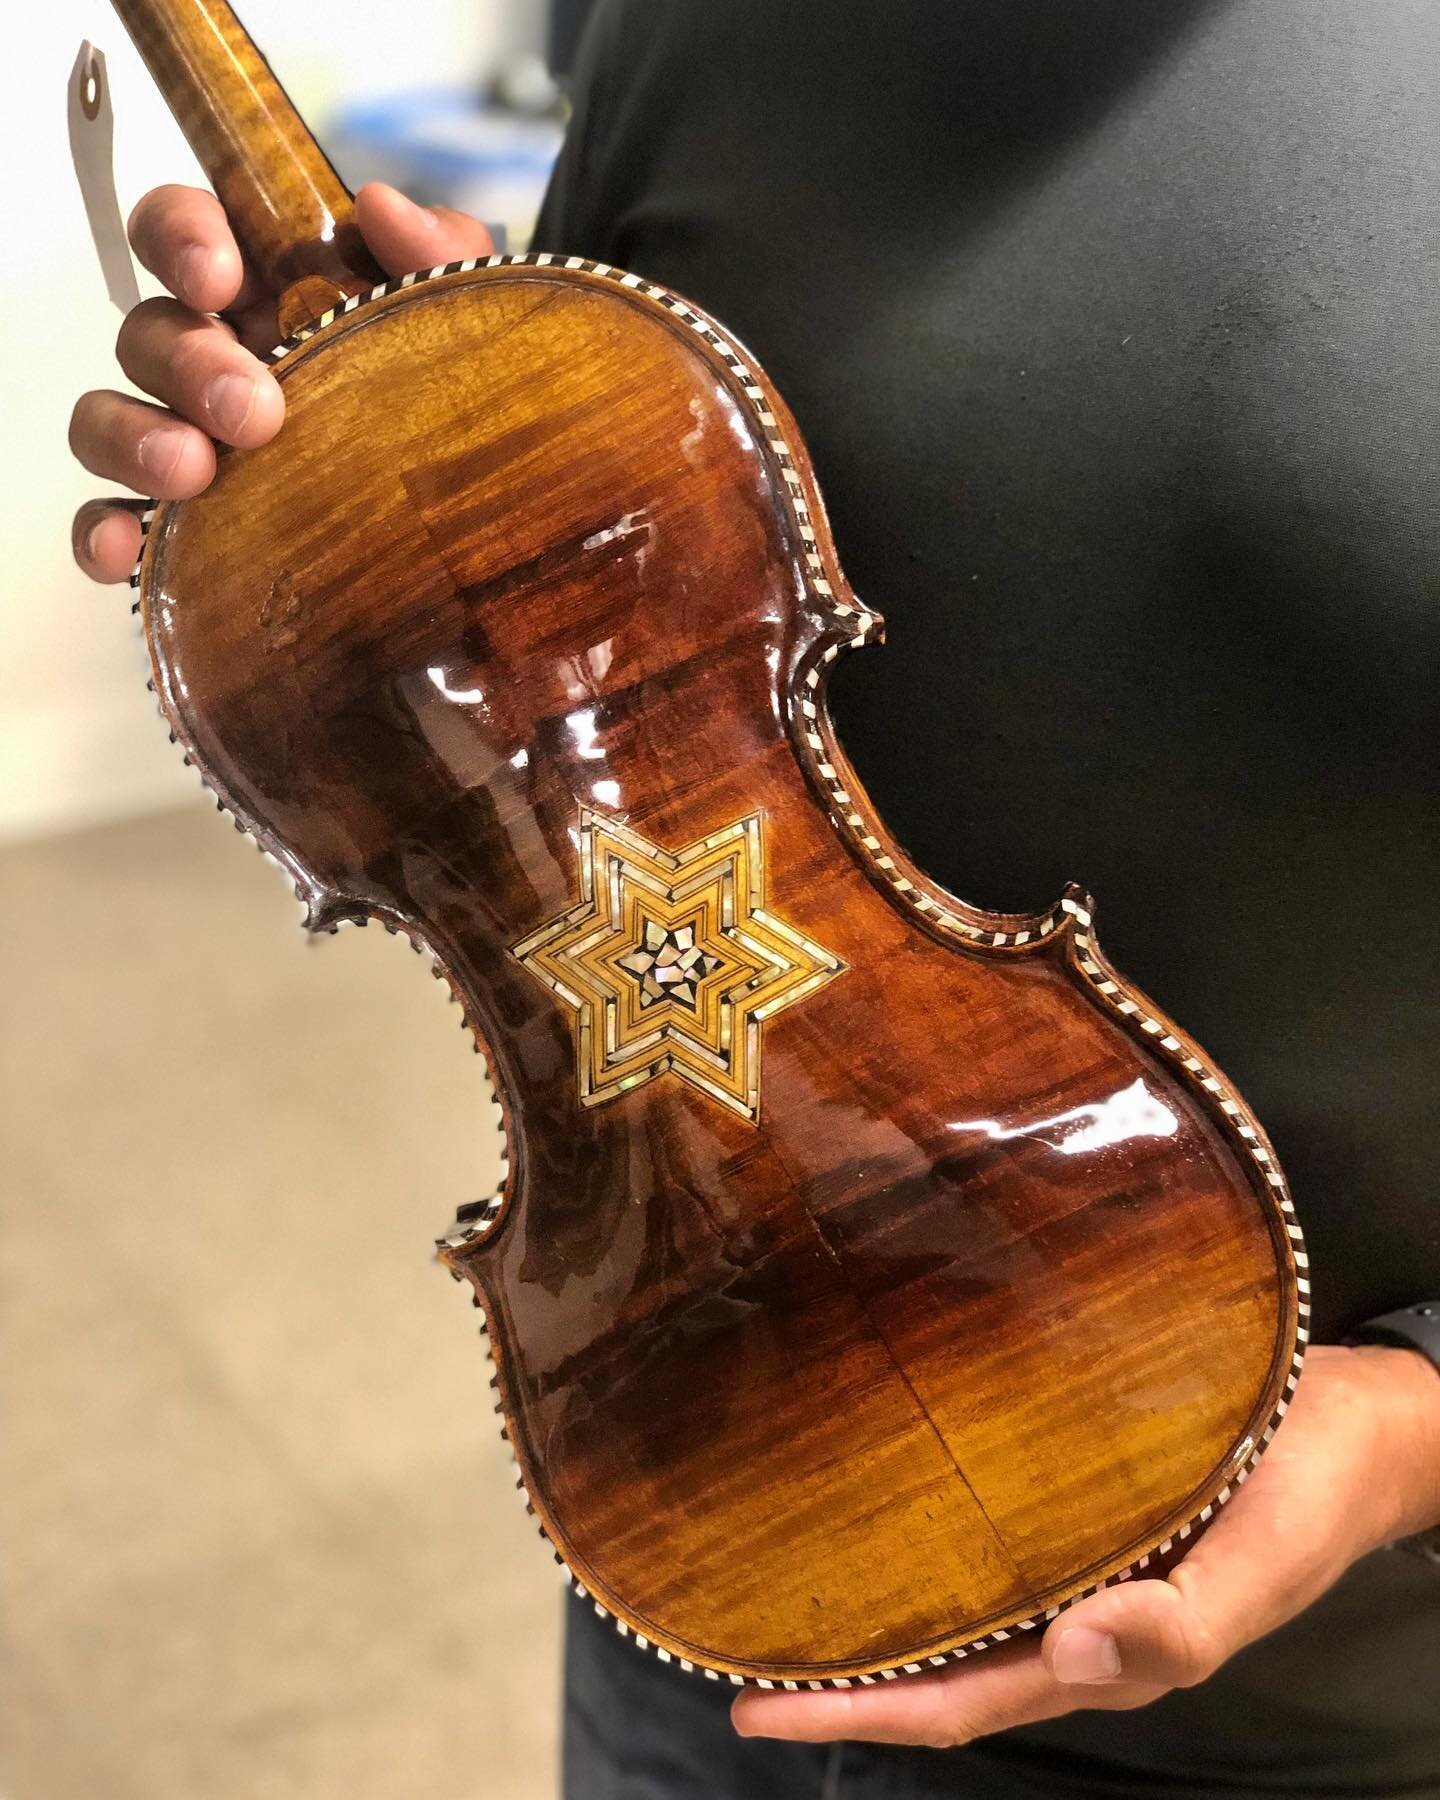 Every violin has a story. 

🎻 There&rsquo;s less than two weeks left to experience the Violins of Hope on display at @vaholocaust, @virginiahistory and @bhmva through October 24th.

These restored violins from the Holocaust show the strength of the 